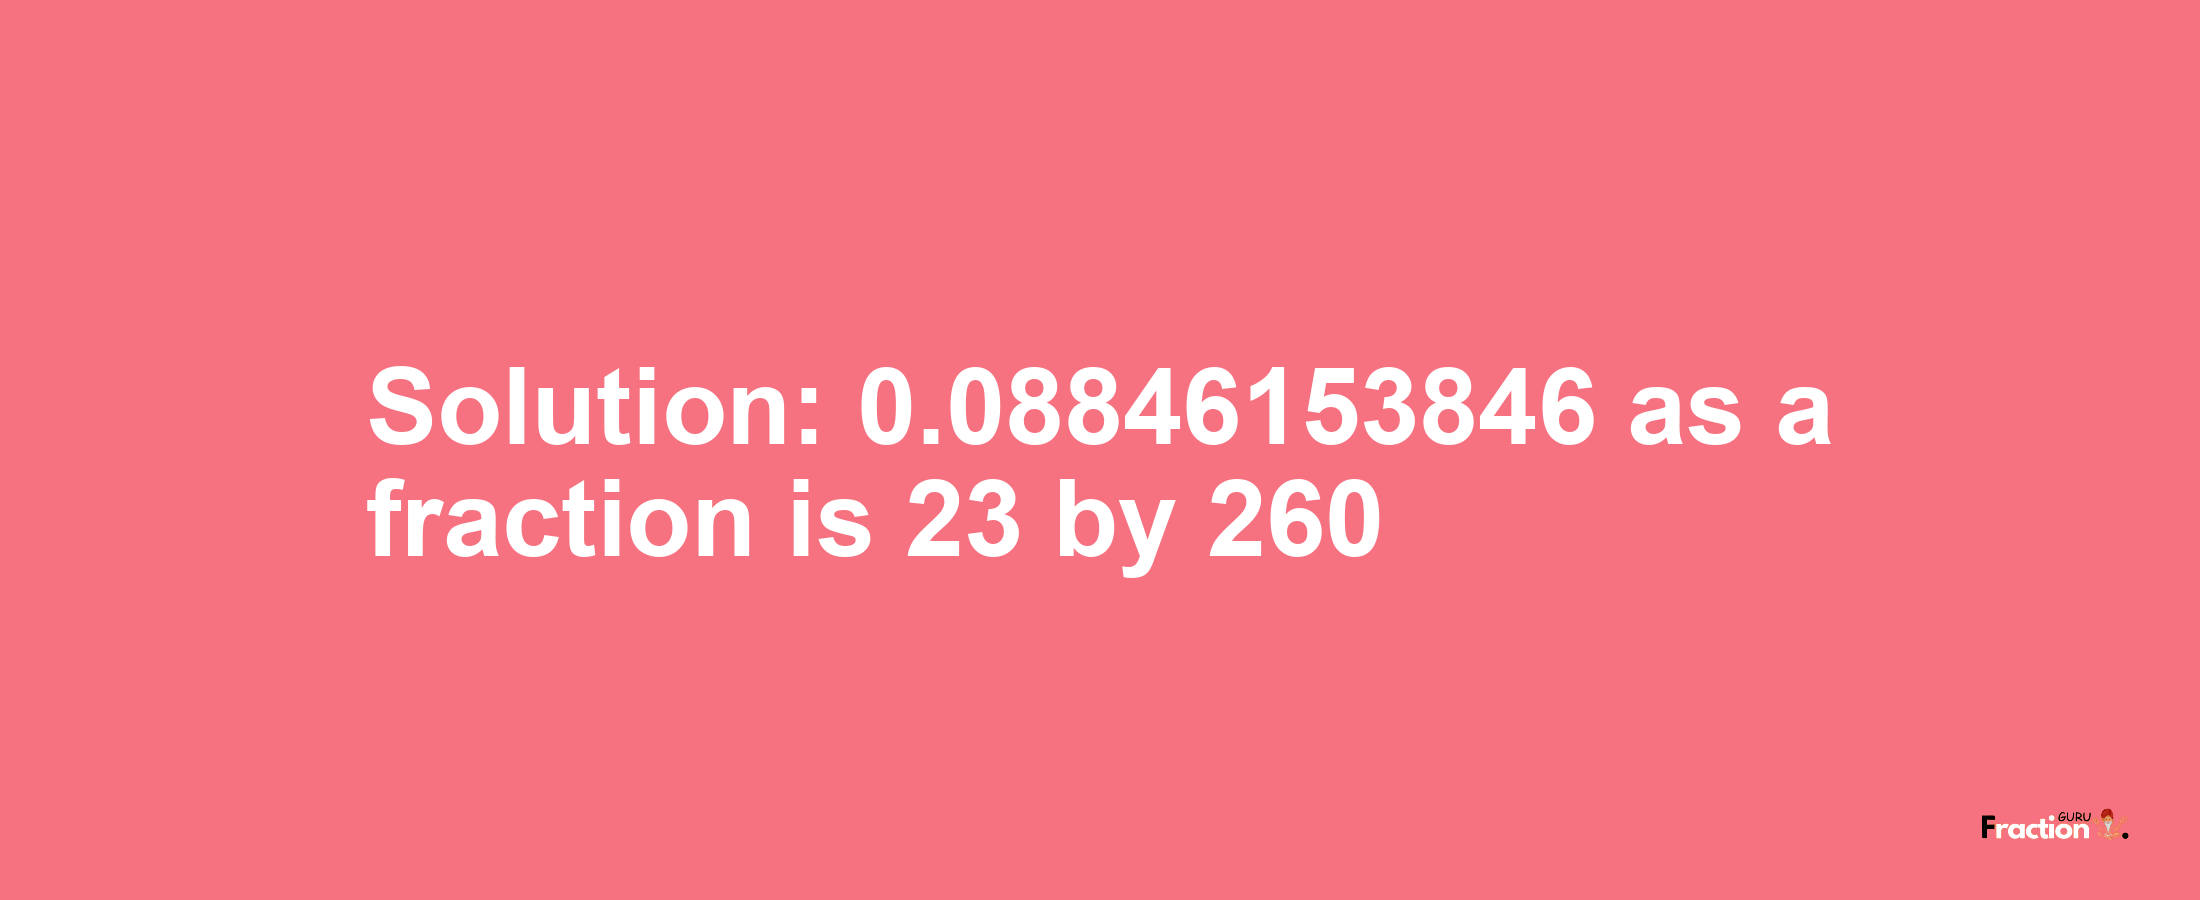 Solution:0.08846153846 as a fraction is 23/260